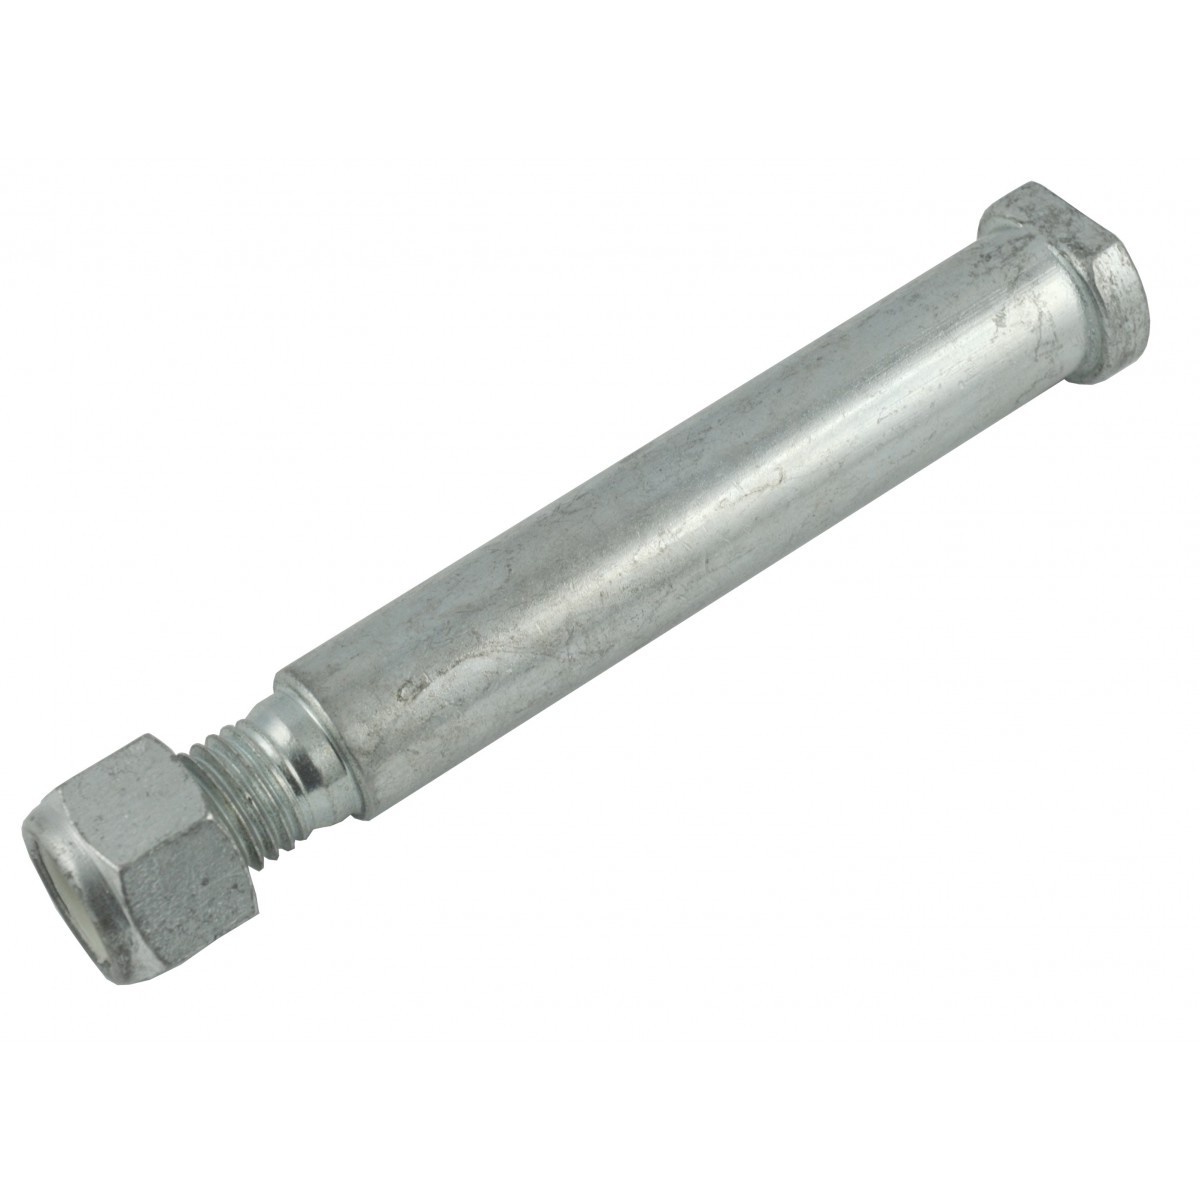 Bolt with thread and nut 210 x 30 mm